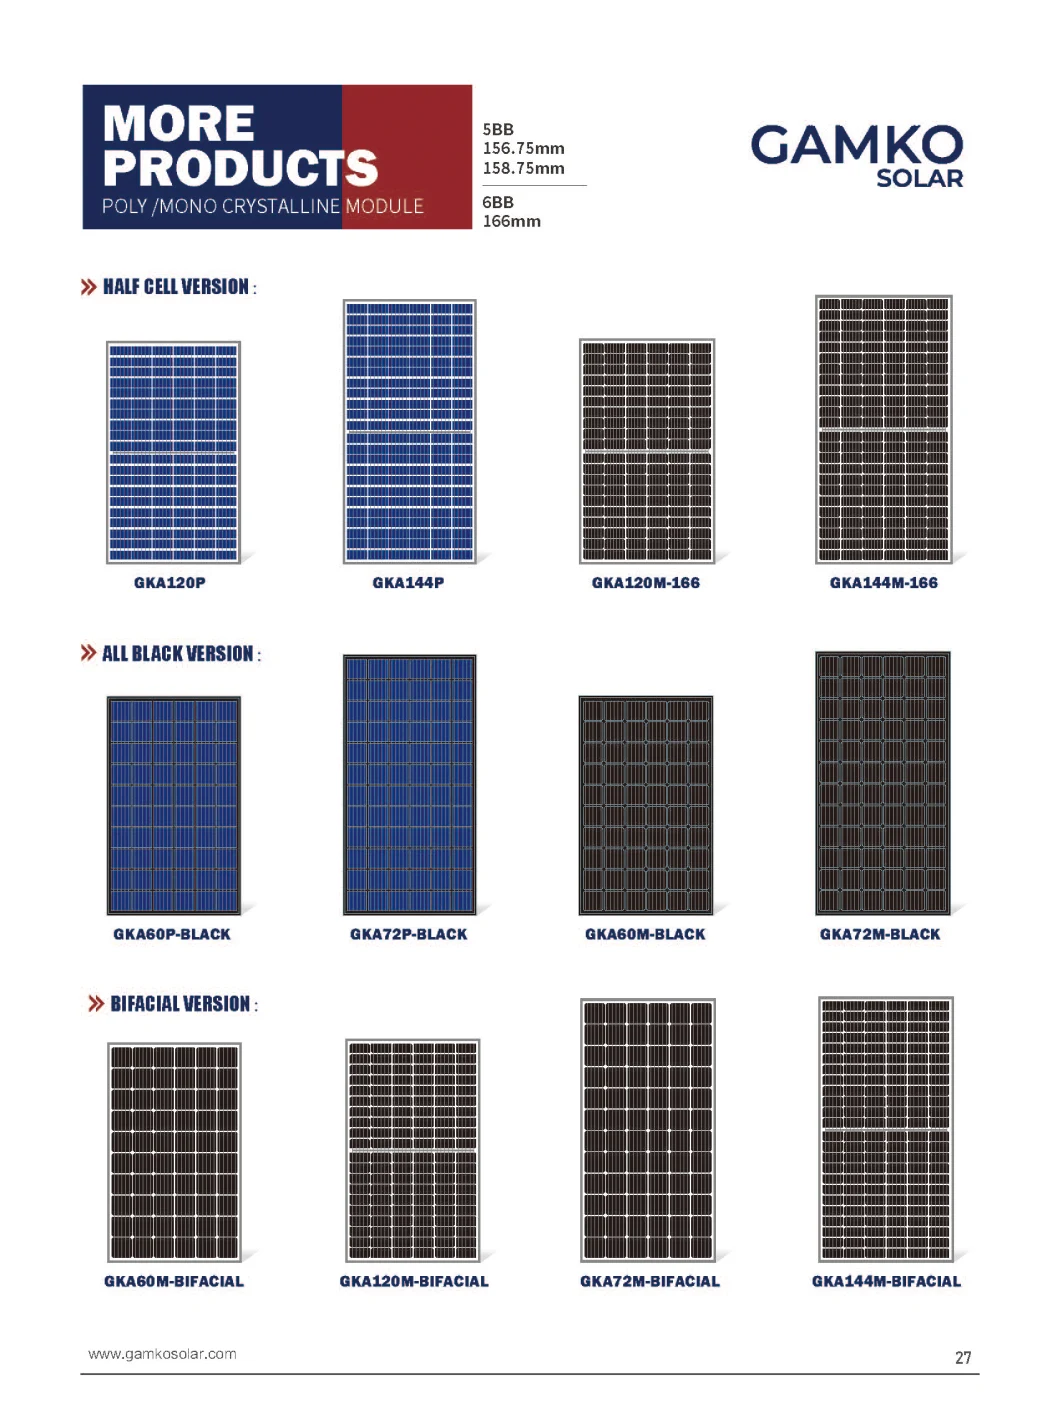 Most Efficient Solar Panels for Sale 505W Monocrystalline Solar Panel 182mm Cell 66 or 132 Cells with CE Certificates 485W 495W